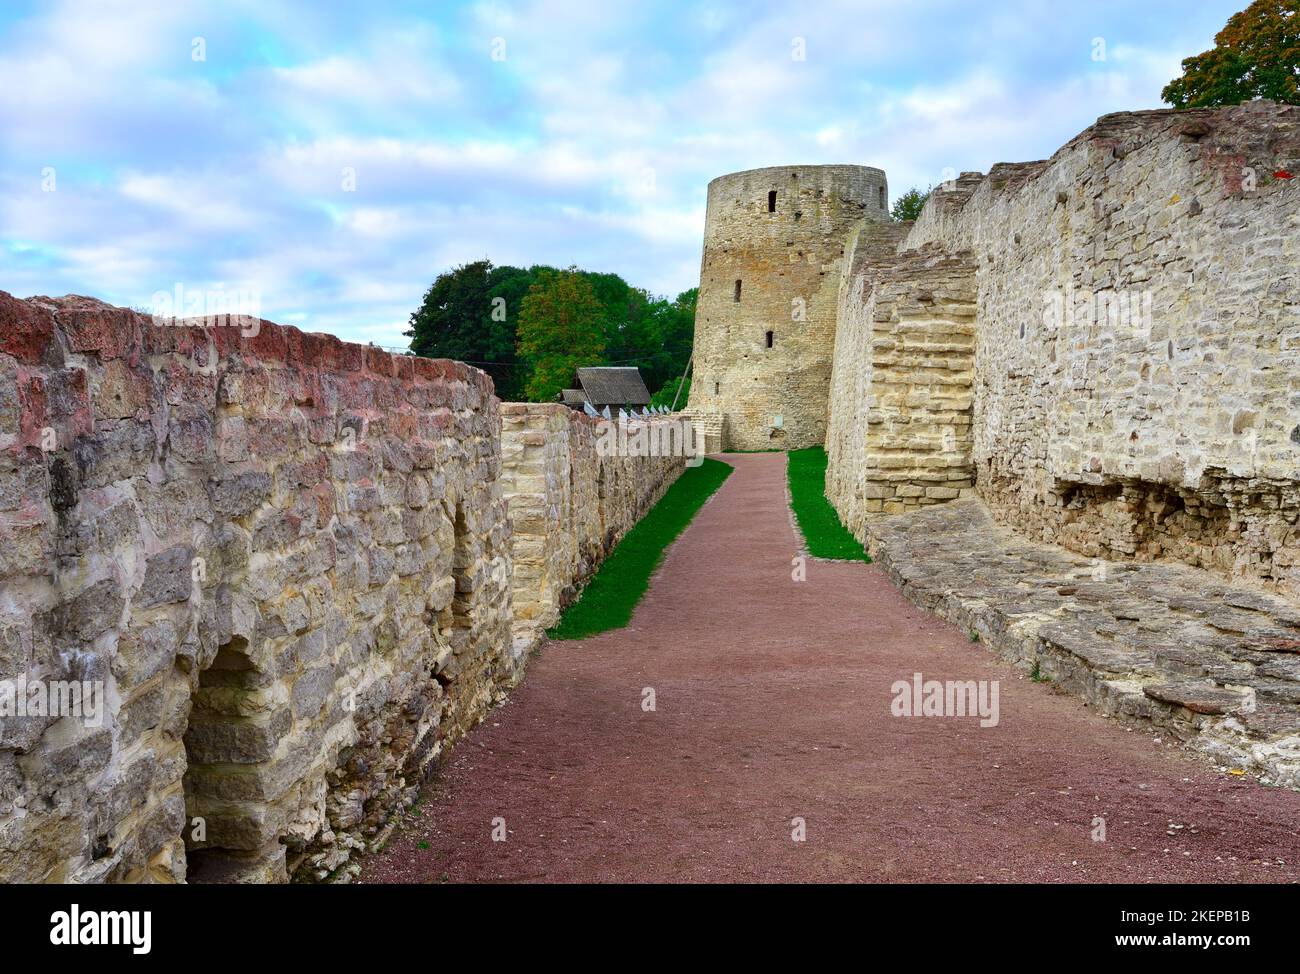 The old Izborsk stone fortress. The defensive corridor at the fortress walls, an architectural monument of the XIV-XVII centuries. Izborsk, Pskov regi Stock Photo